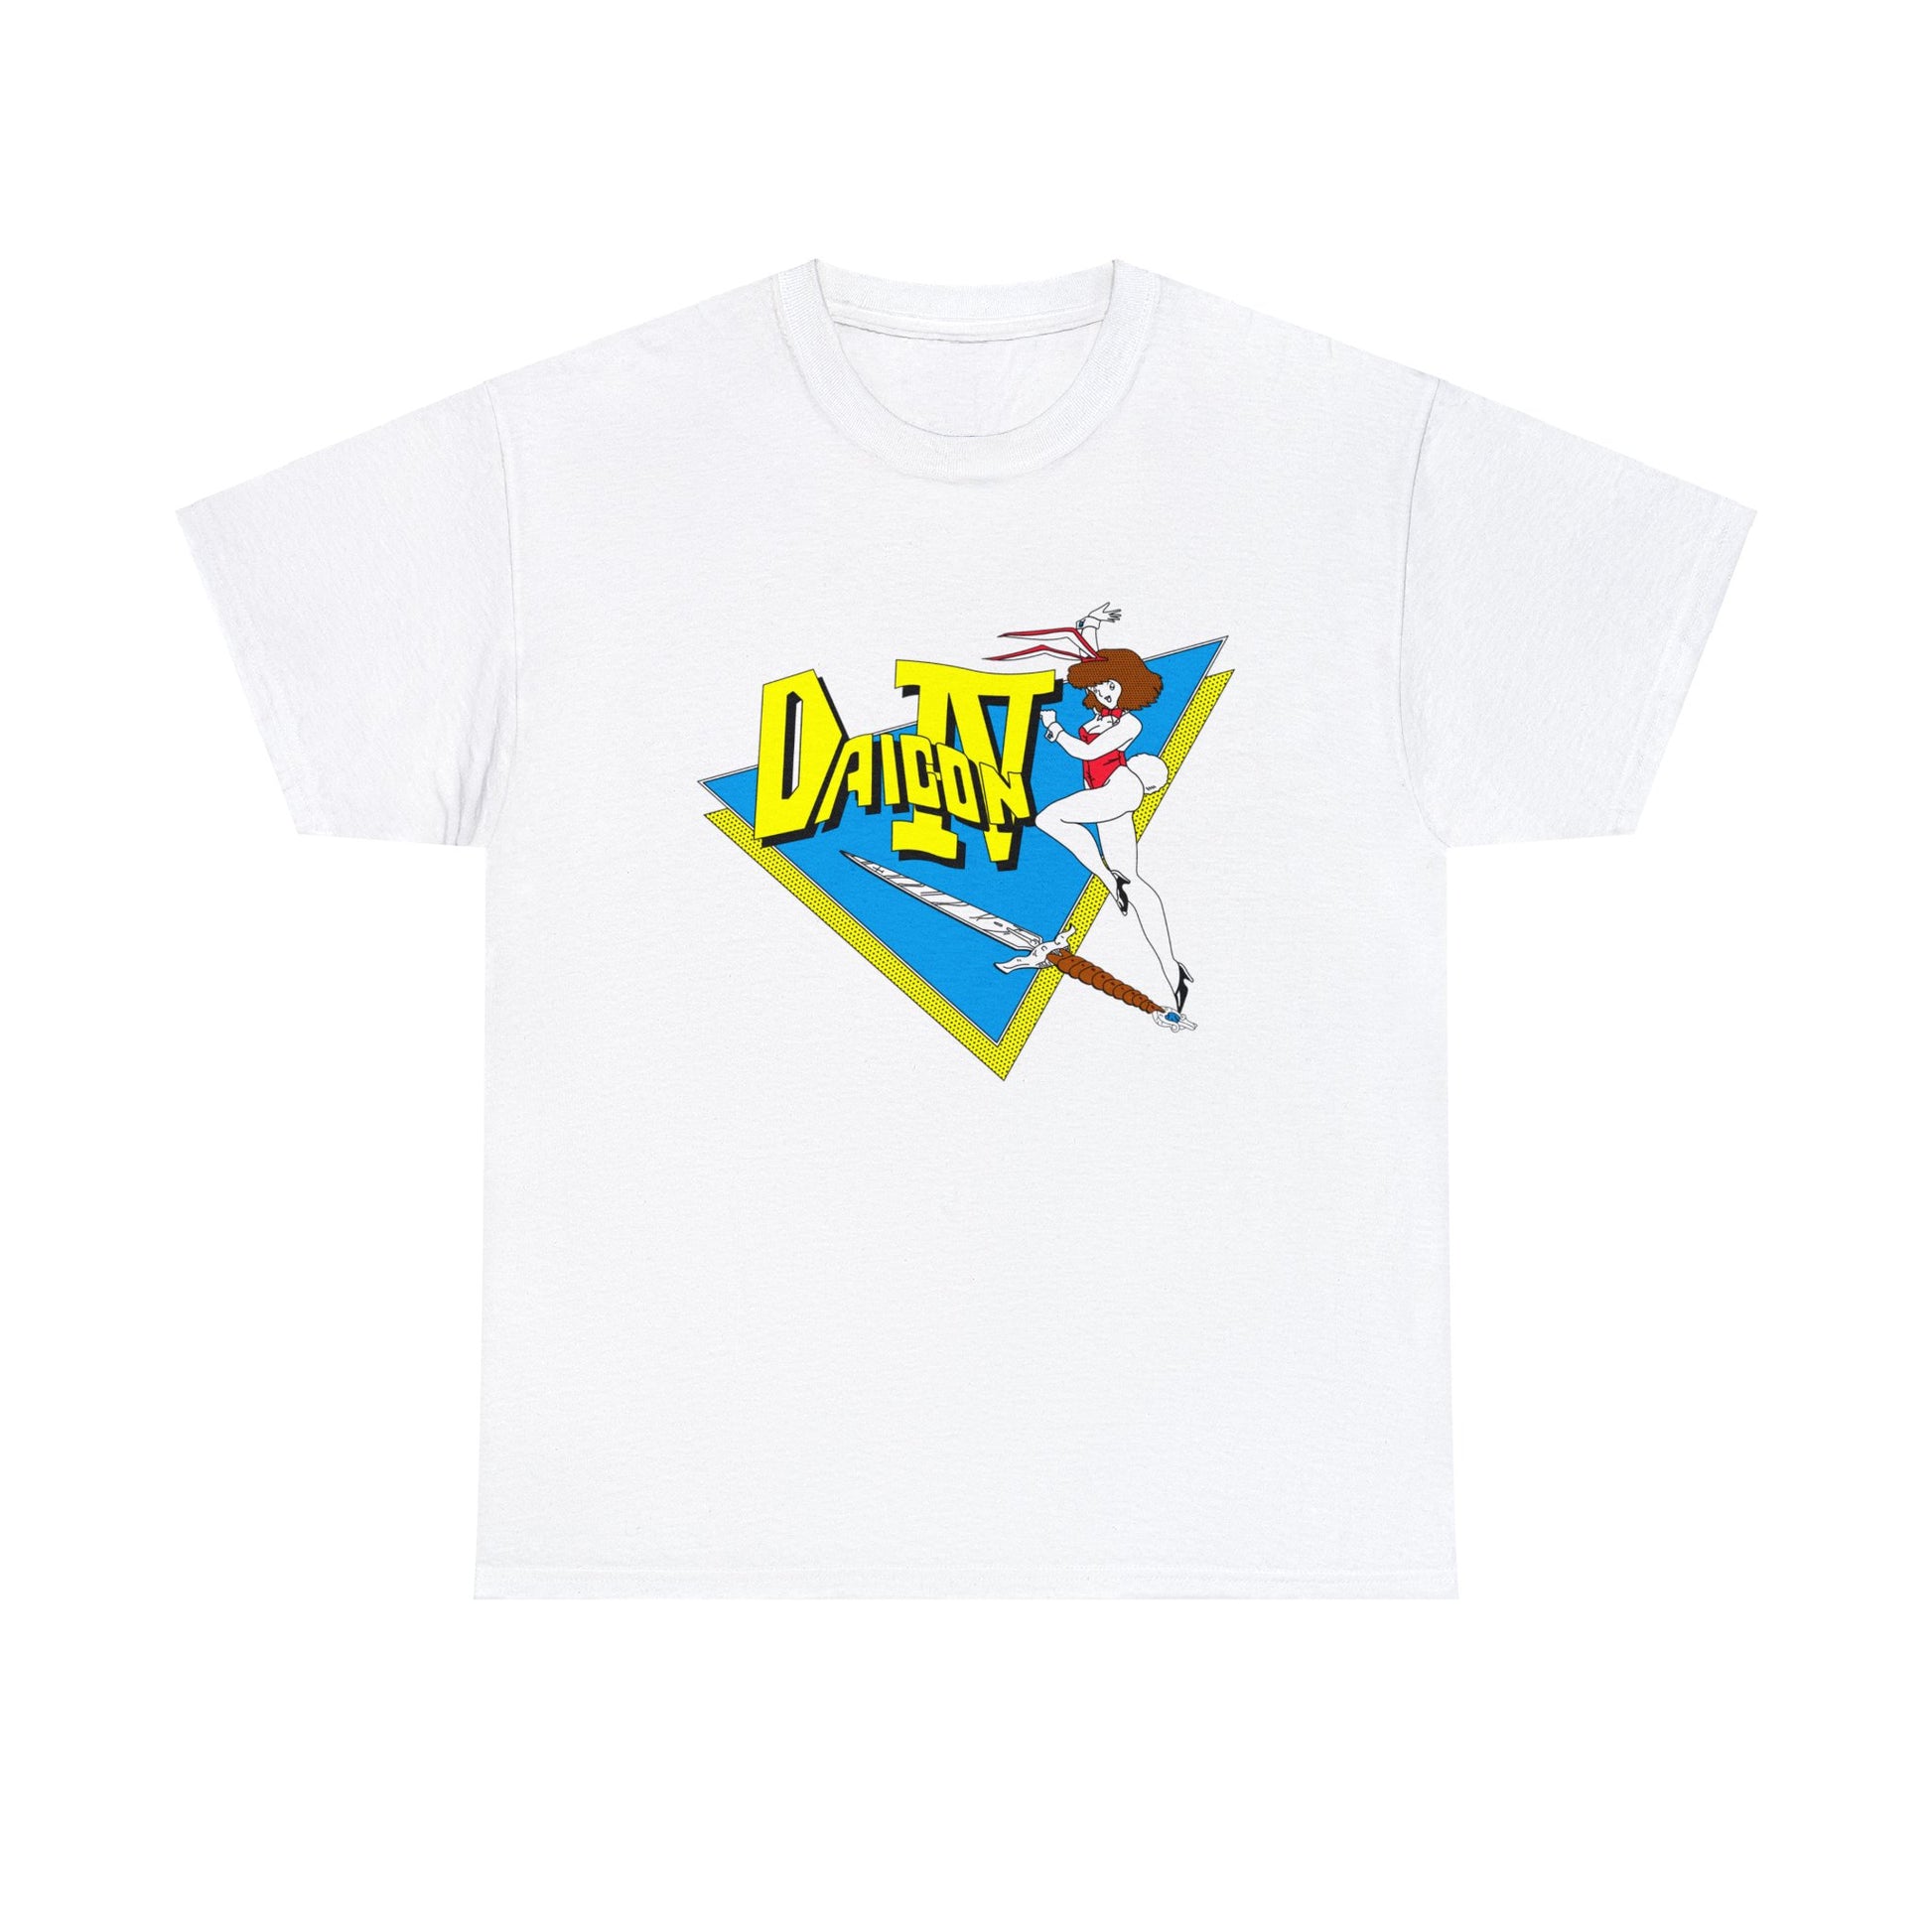 DAICON IV Anime Films 80s T-shirt for Sale